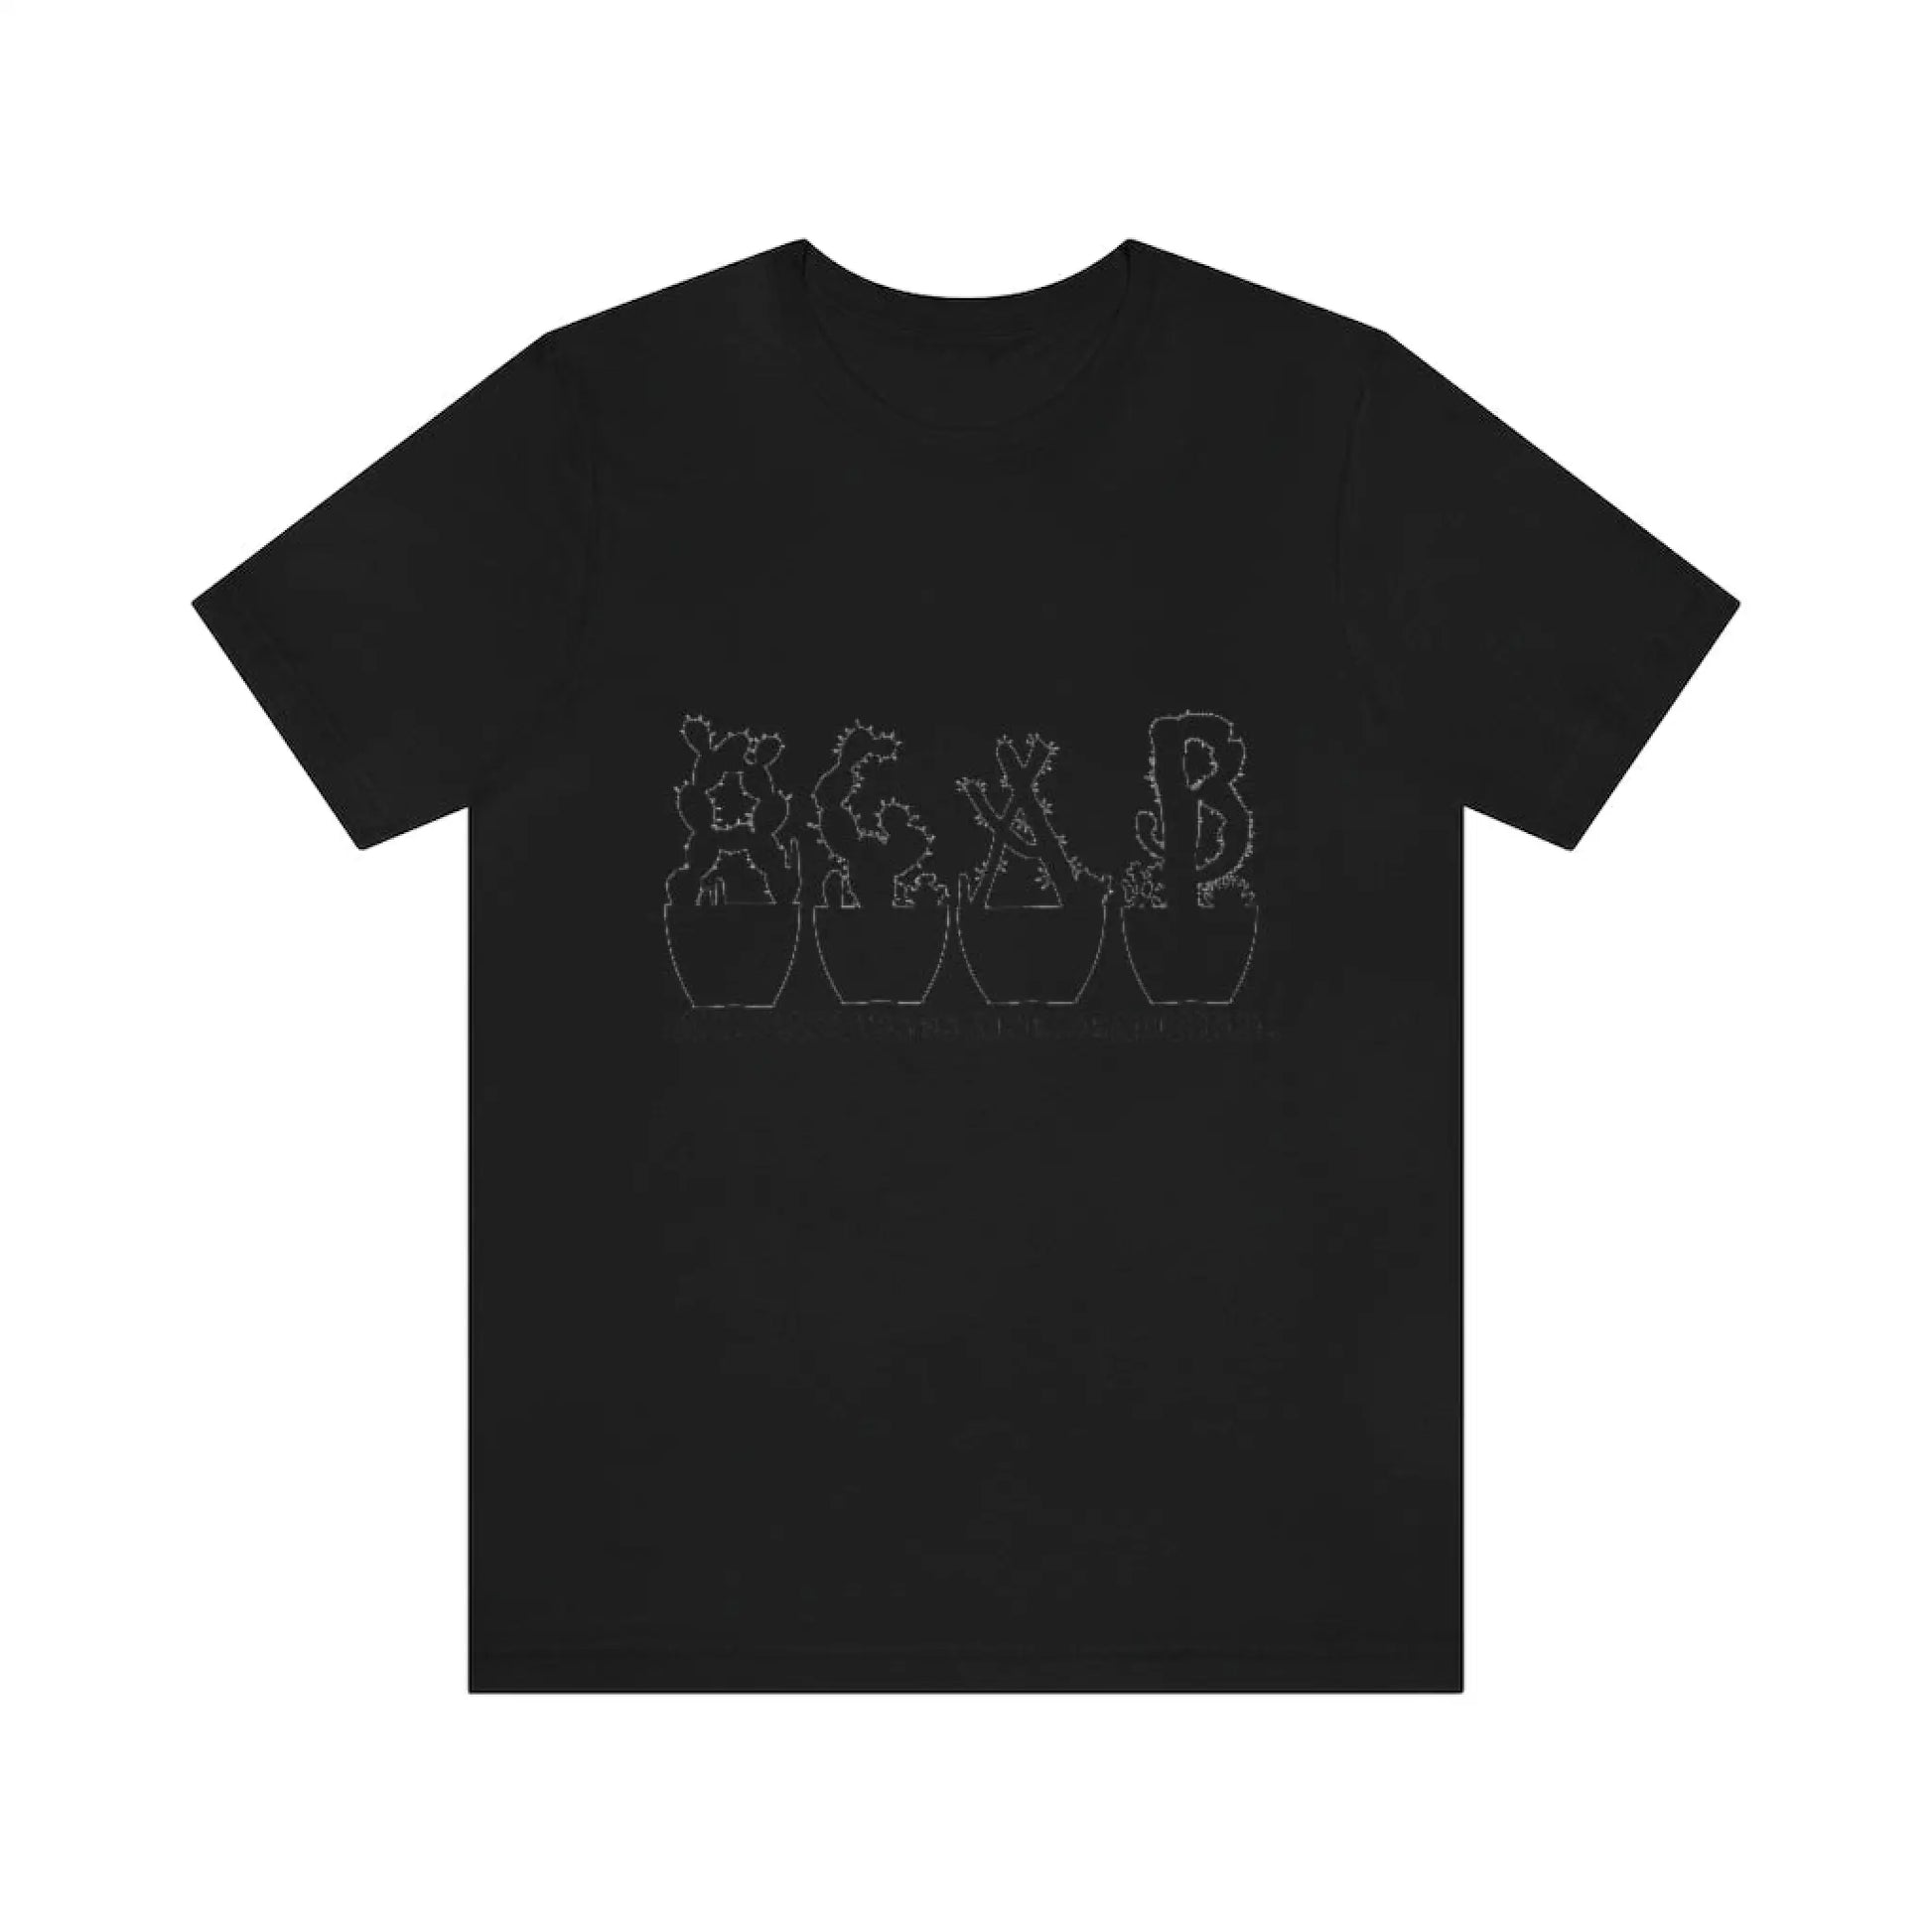 Shirts - All Cactuses Are Beautiful - Black / S - T-Shirt